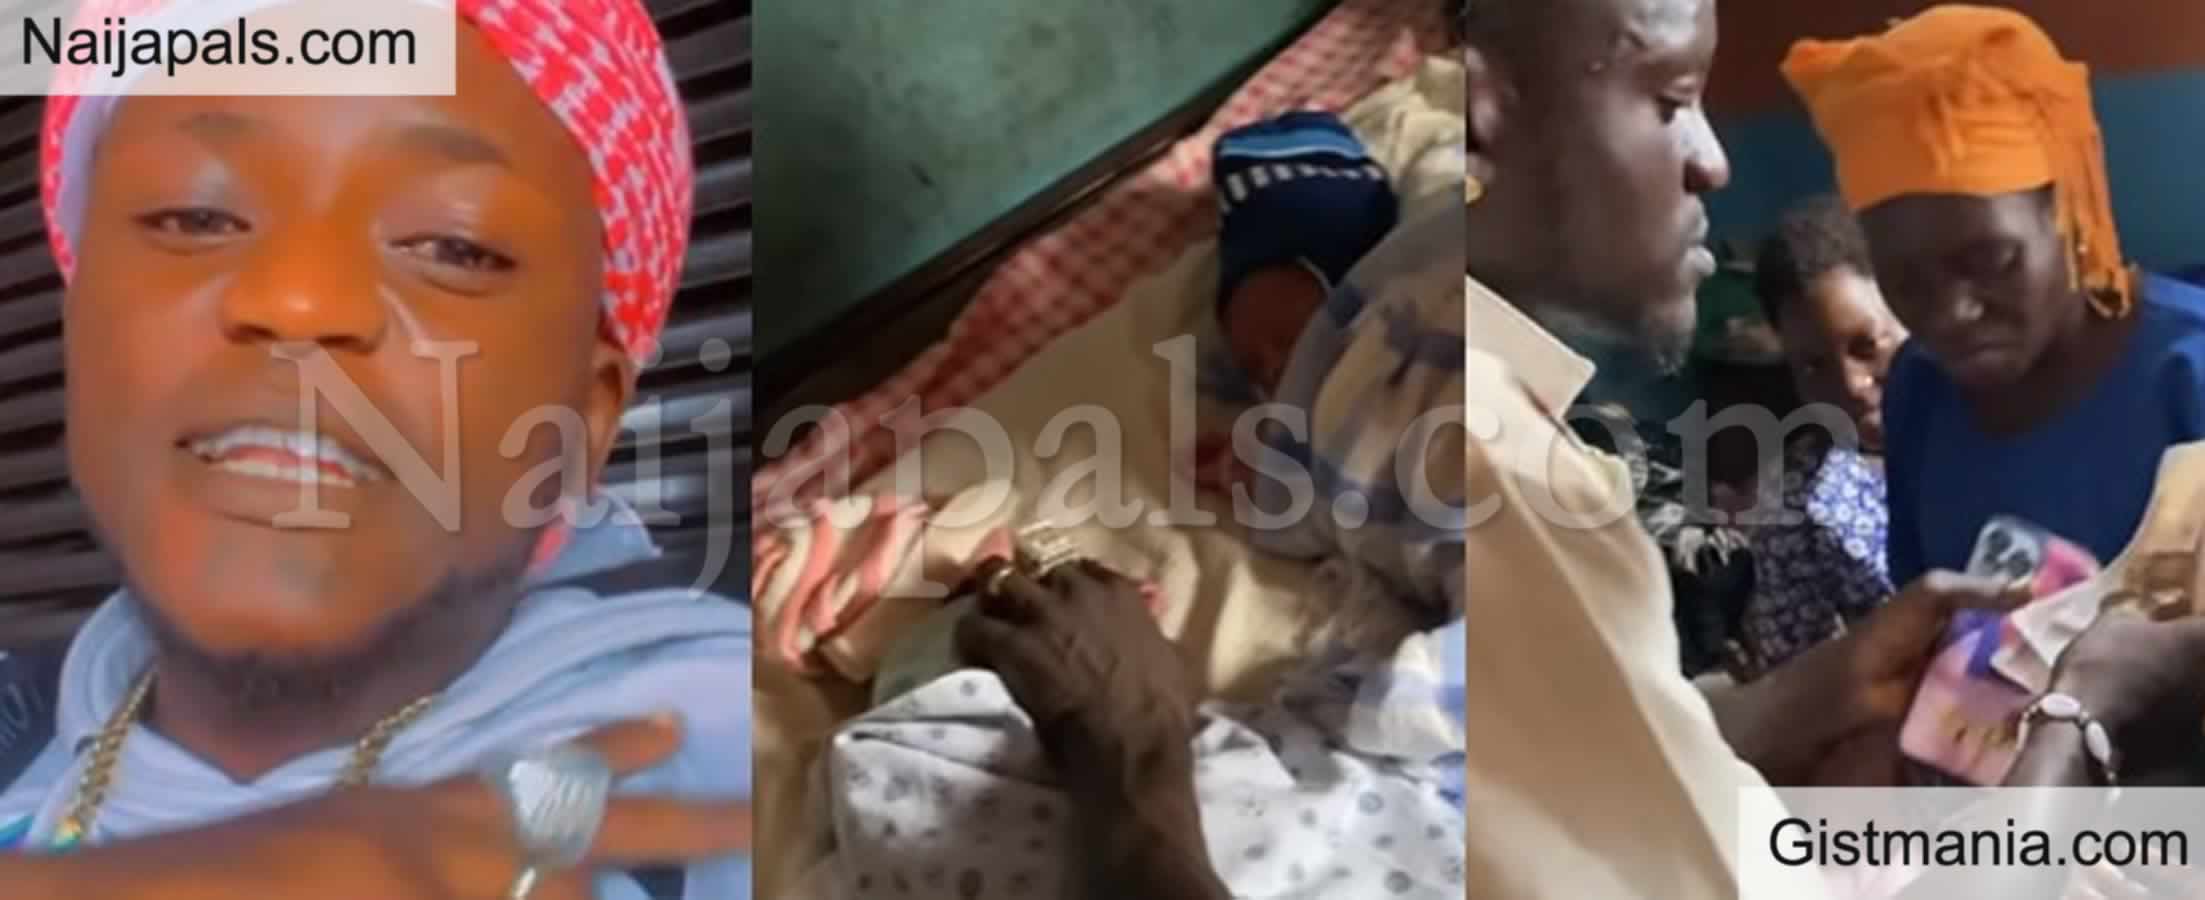 <img alt='.' class='lazyload' data-src='https://img.gistmania.com/emot/video.gif' /> <b>Portable Visits New Mother Of Twins, Gifts Her Money</b> (VIDEO)